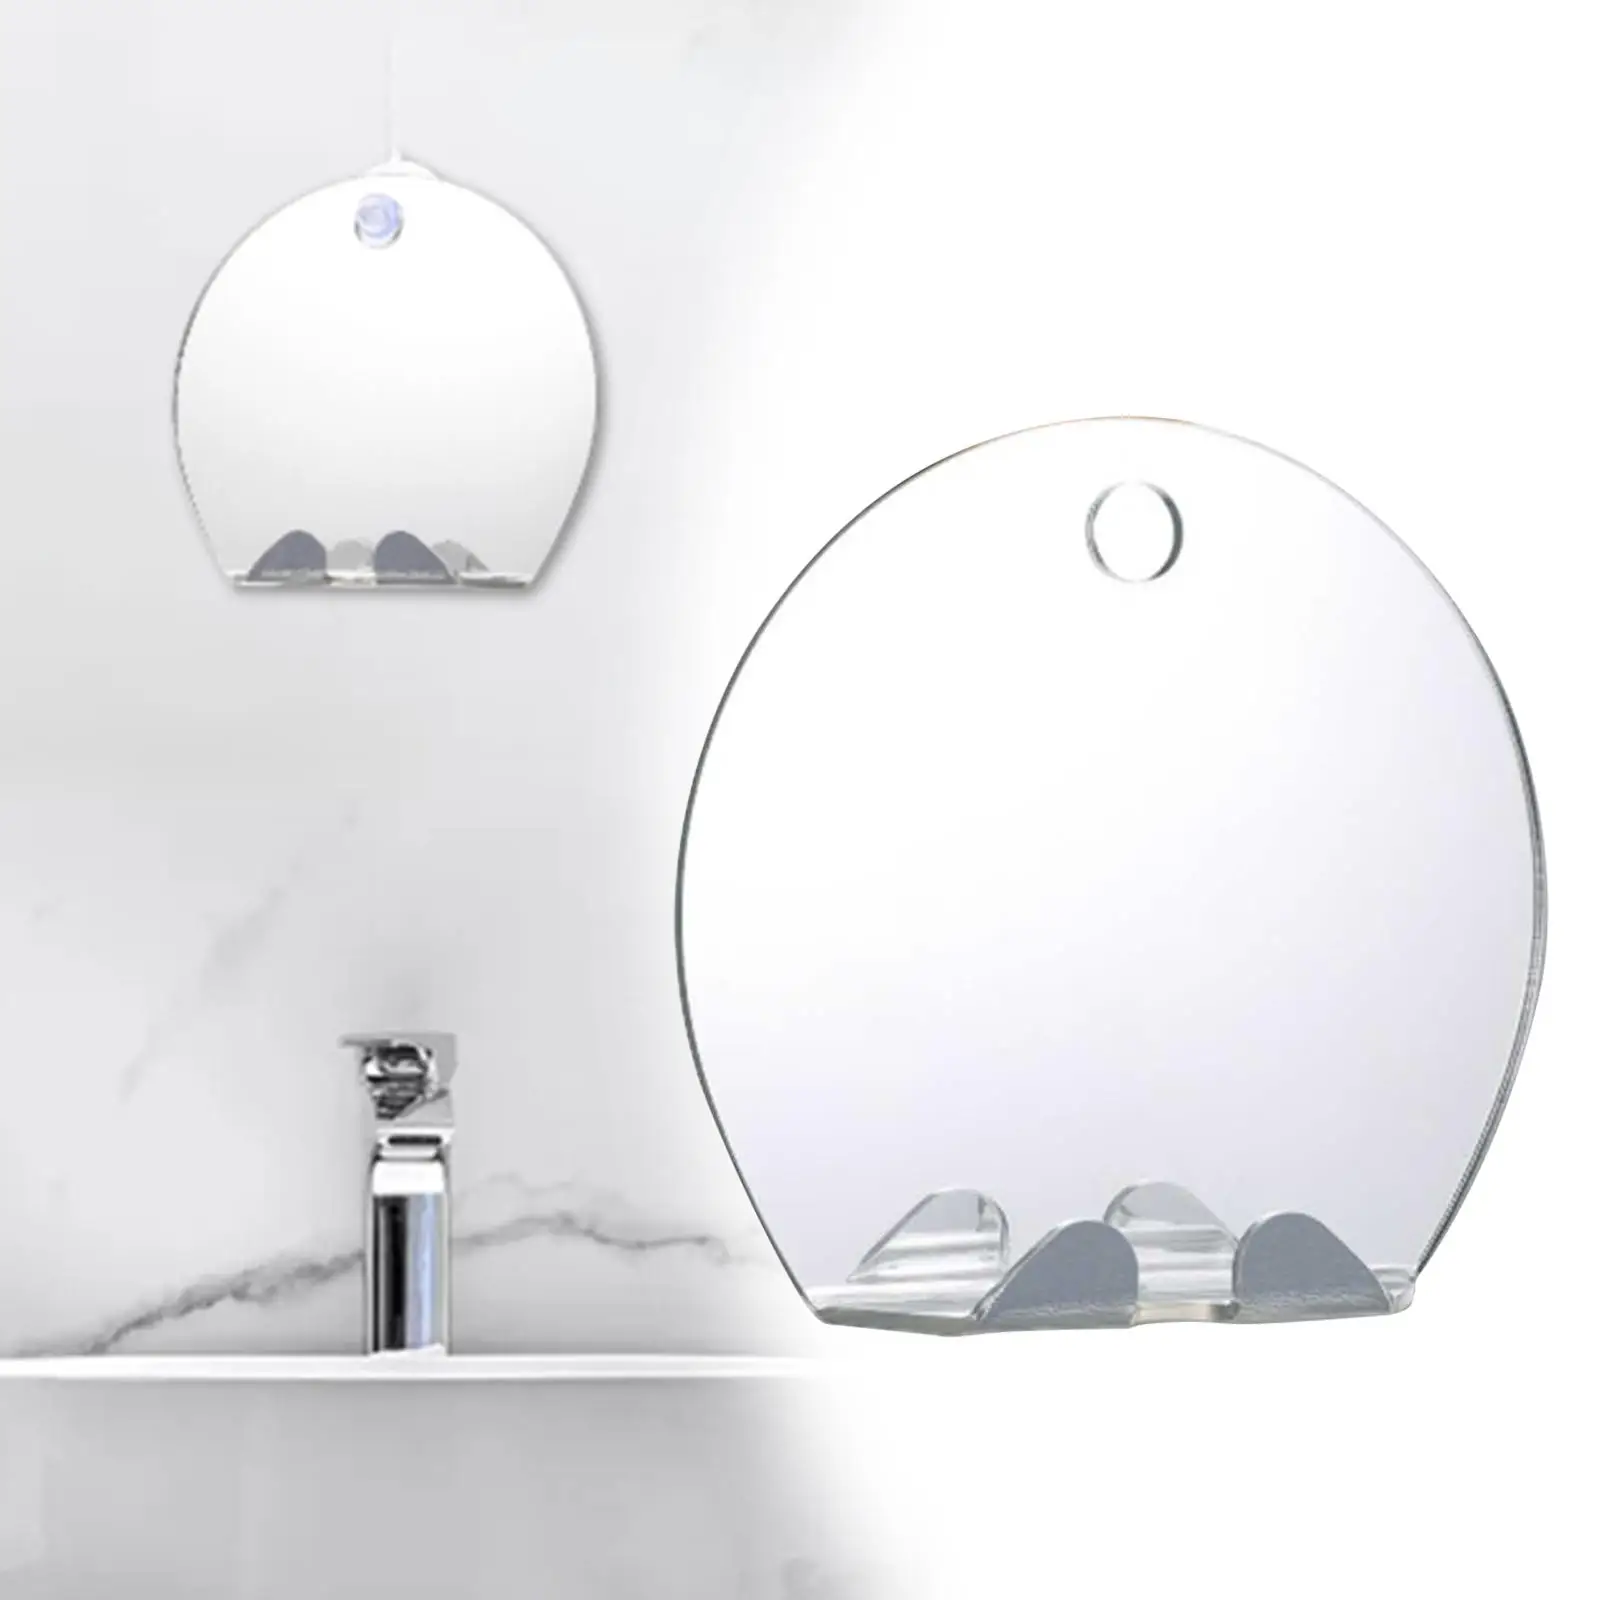 Unbreakable Portable Anti-Fog Shower Shaving Mirror Makeup Mirror with Suction Hook